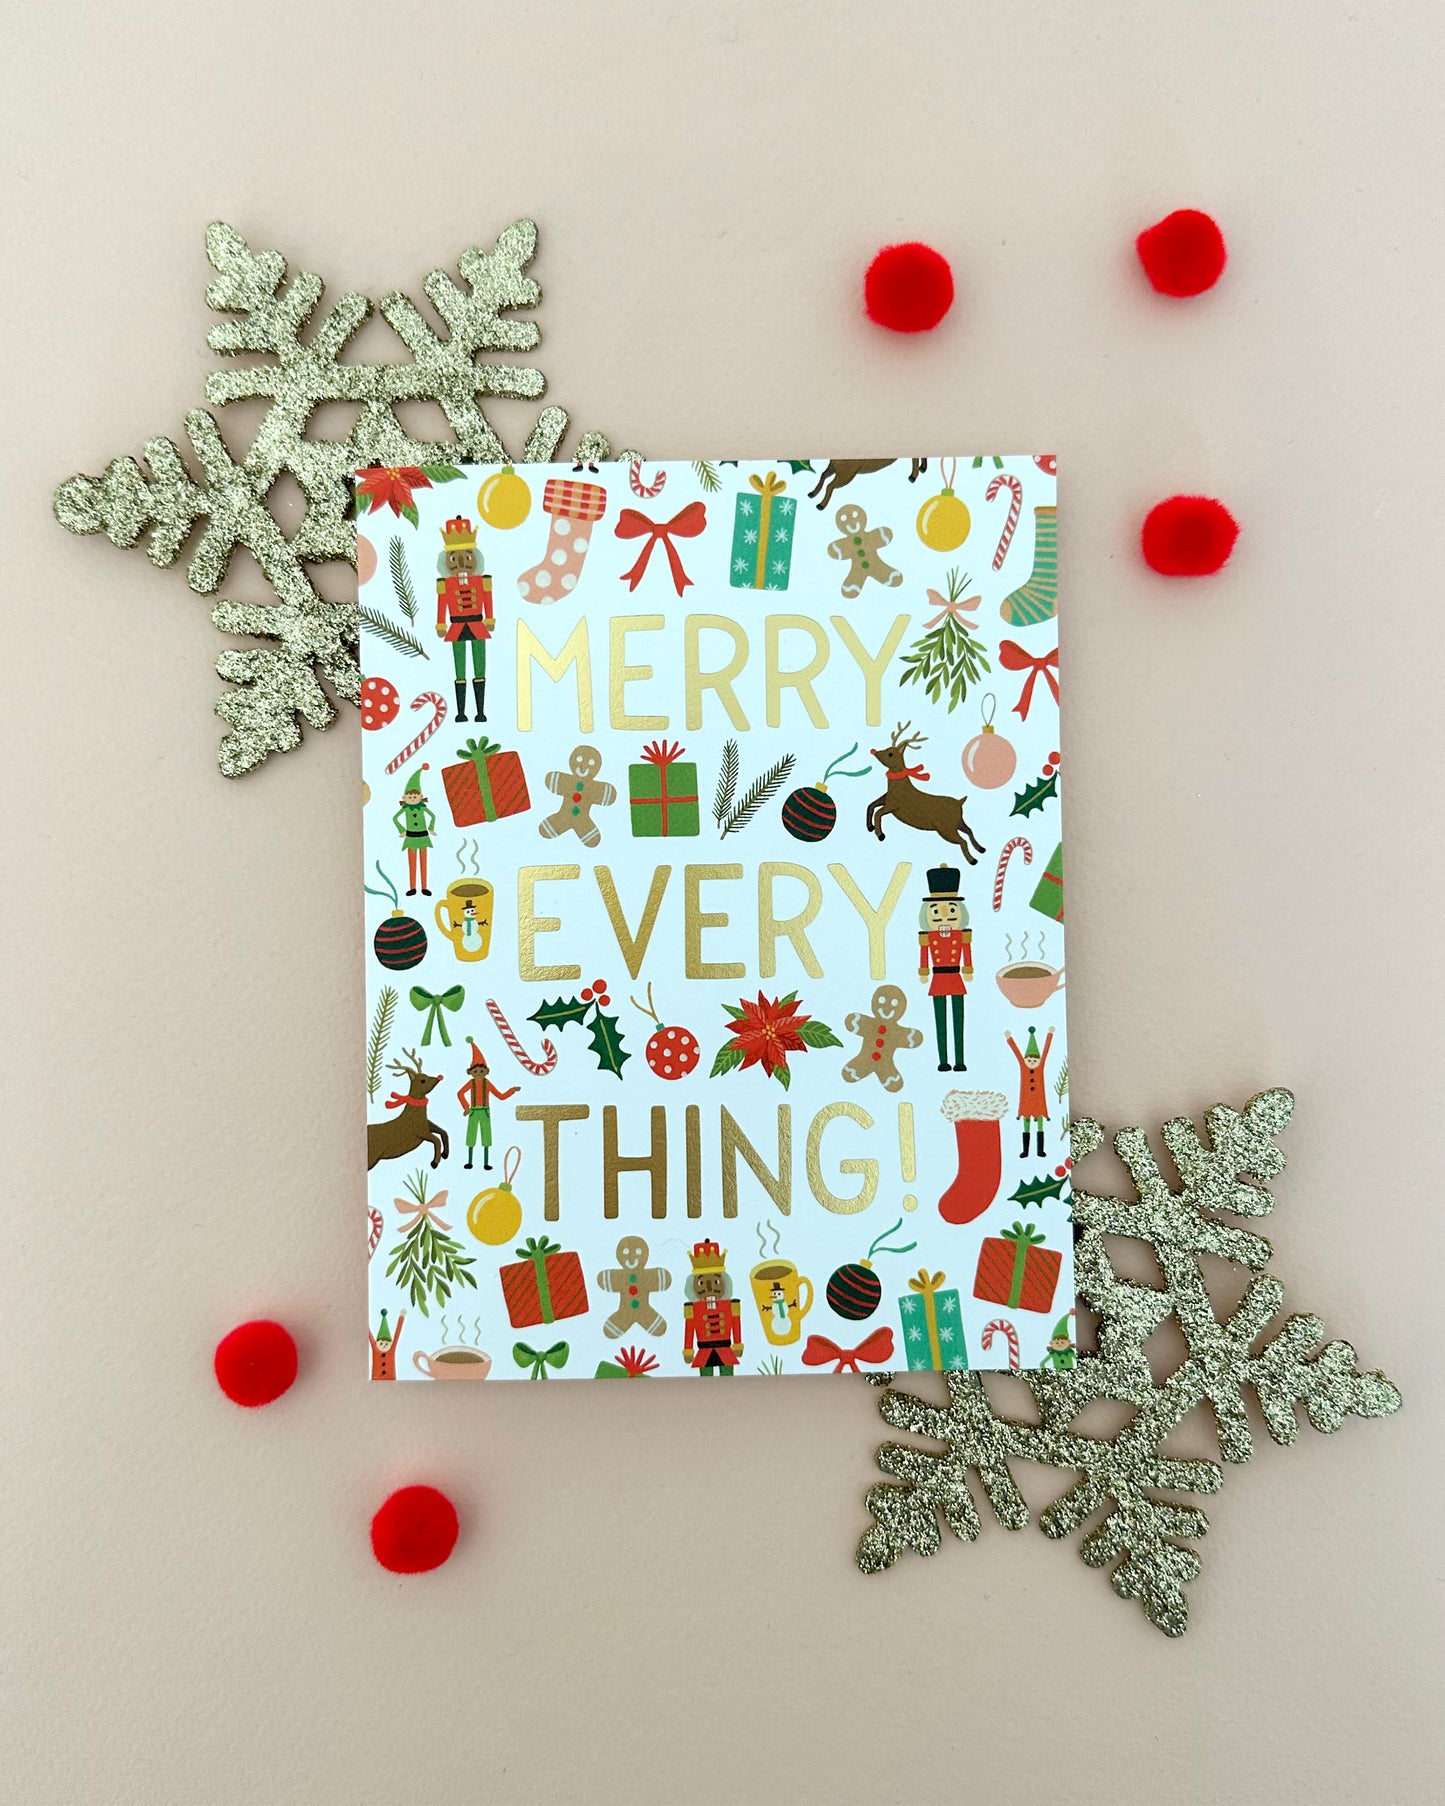 MERRY EVERYTHING - HOLIDAY GREETING CARD, BOXED SET OF 8